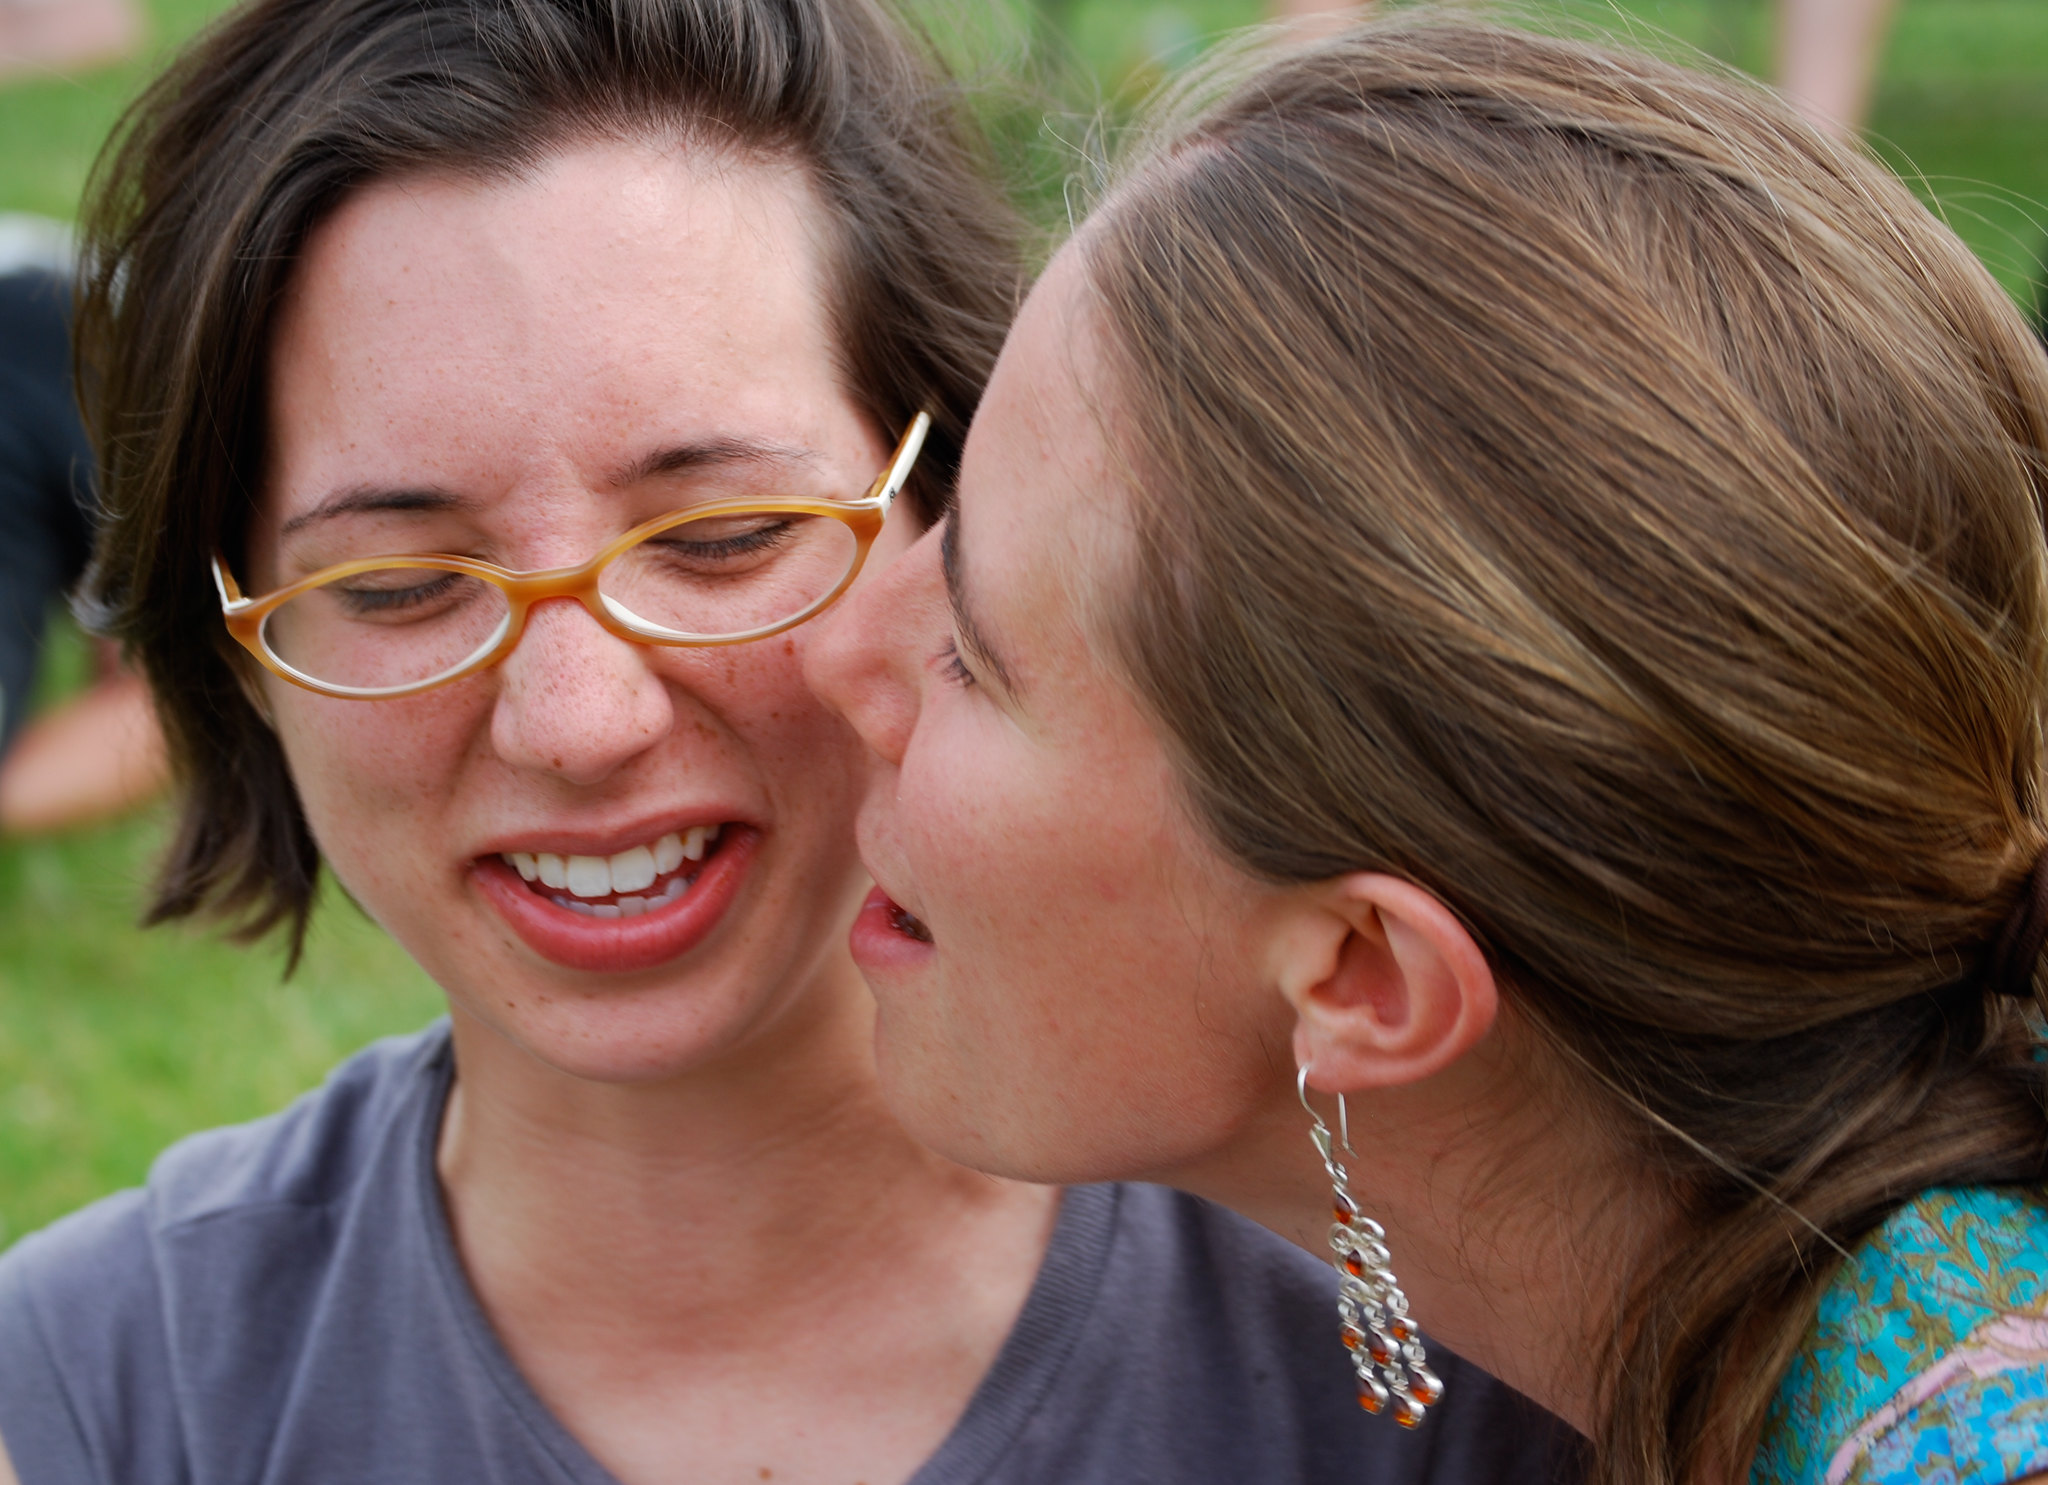 38 Best Cute Lesbian Quotes on Love And Relationships